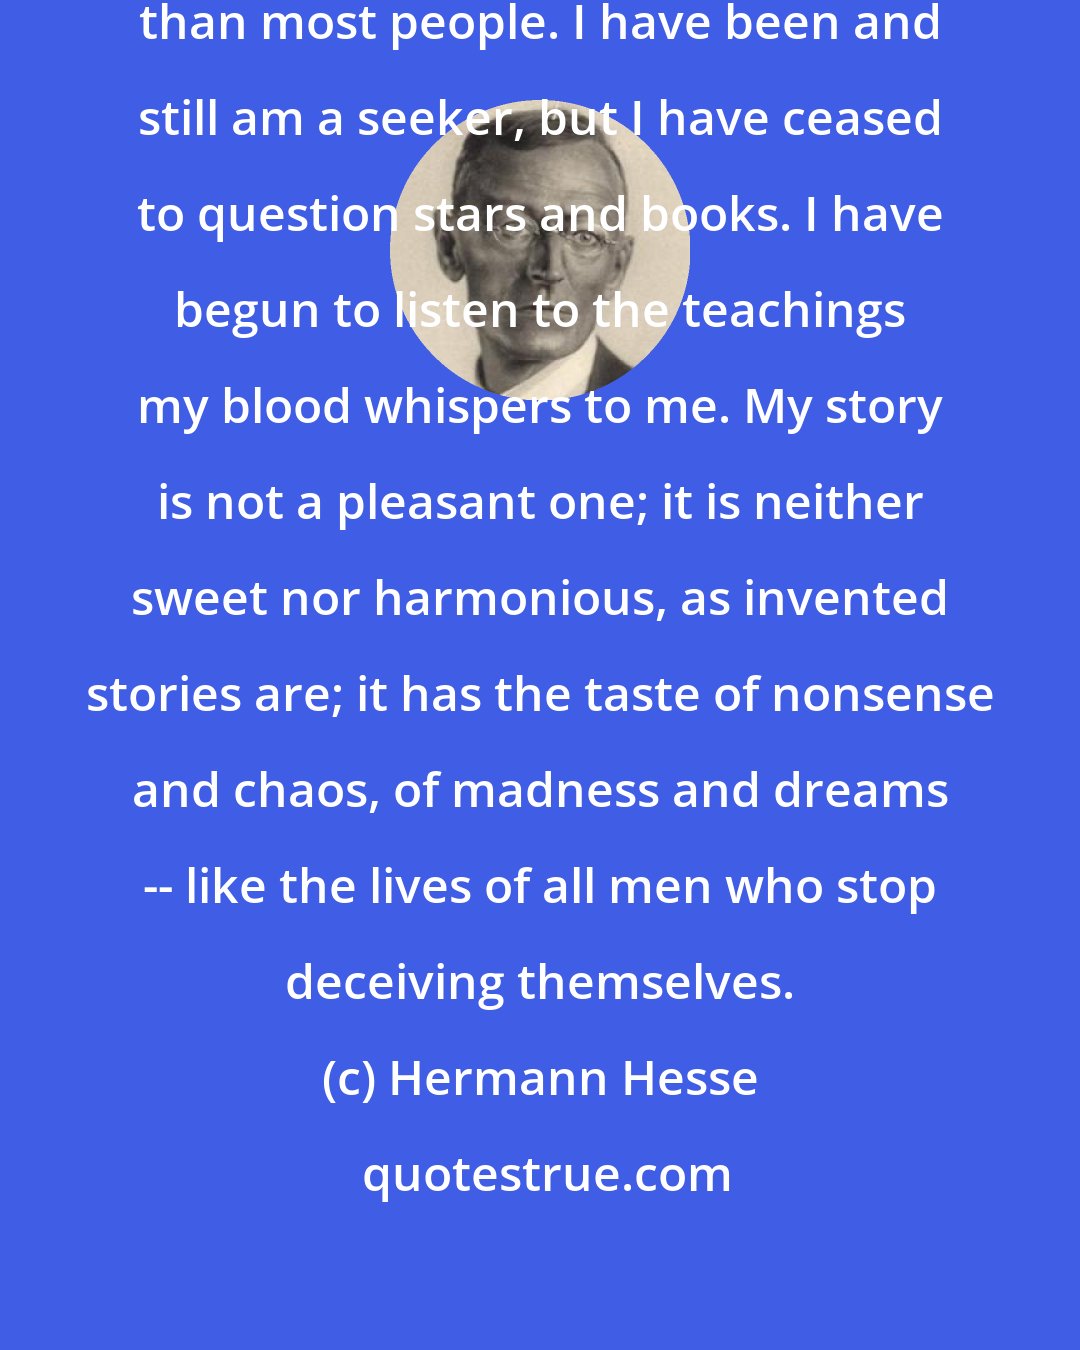 Hermann Hesse: I do not consider myself less ignorant than most people. I have been and still am a seeker, but I have ceased to question stars and books. I have begun to listen to the teachings my blood whispers to me. My story is not a pleasant one; it is neither sweet nor harmonious, as invented stories are; it has the taste of nonsense and chaos, of madness and dreams -- like the lives of all men who stop deceiving themselves.